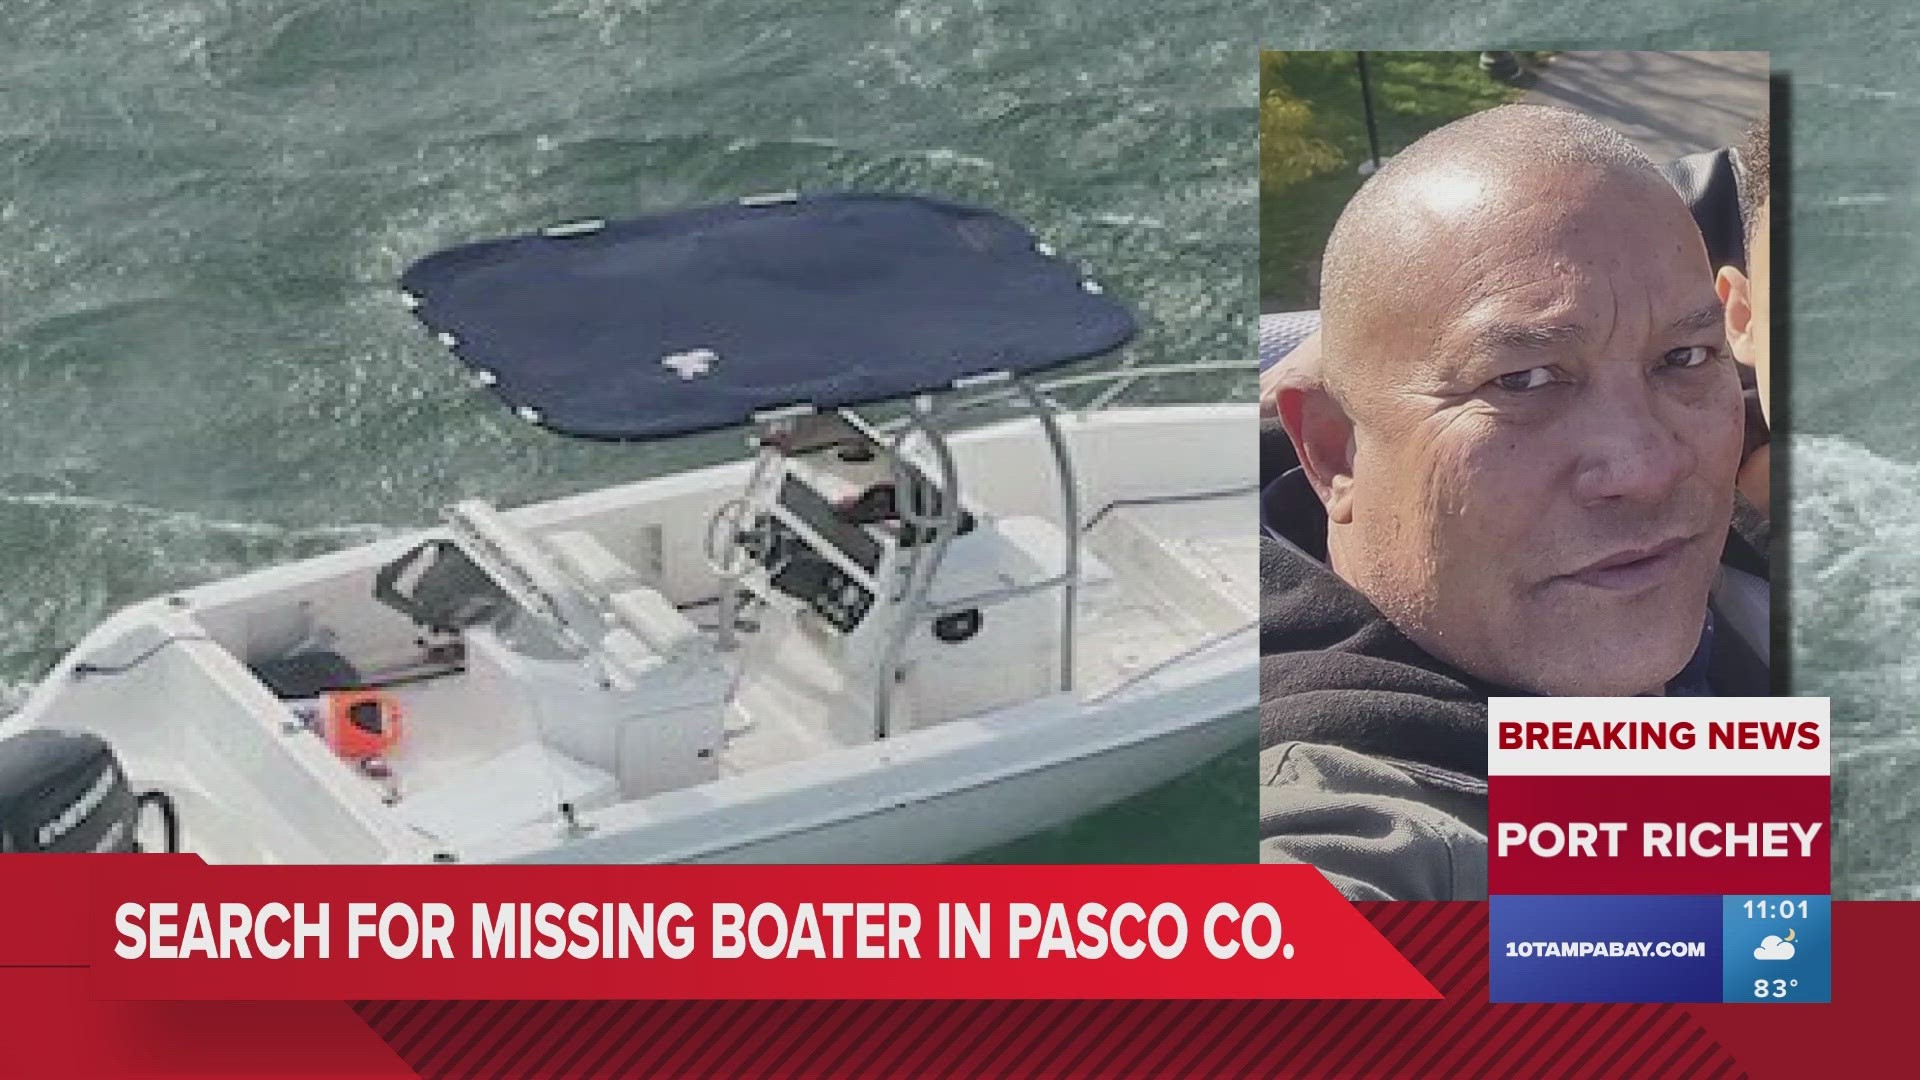 Andre Nolasco, 57, was reported missing after launching his boat from Nick's Park Sunday morning in Port Richey.